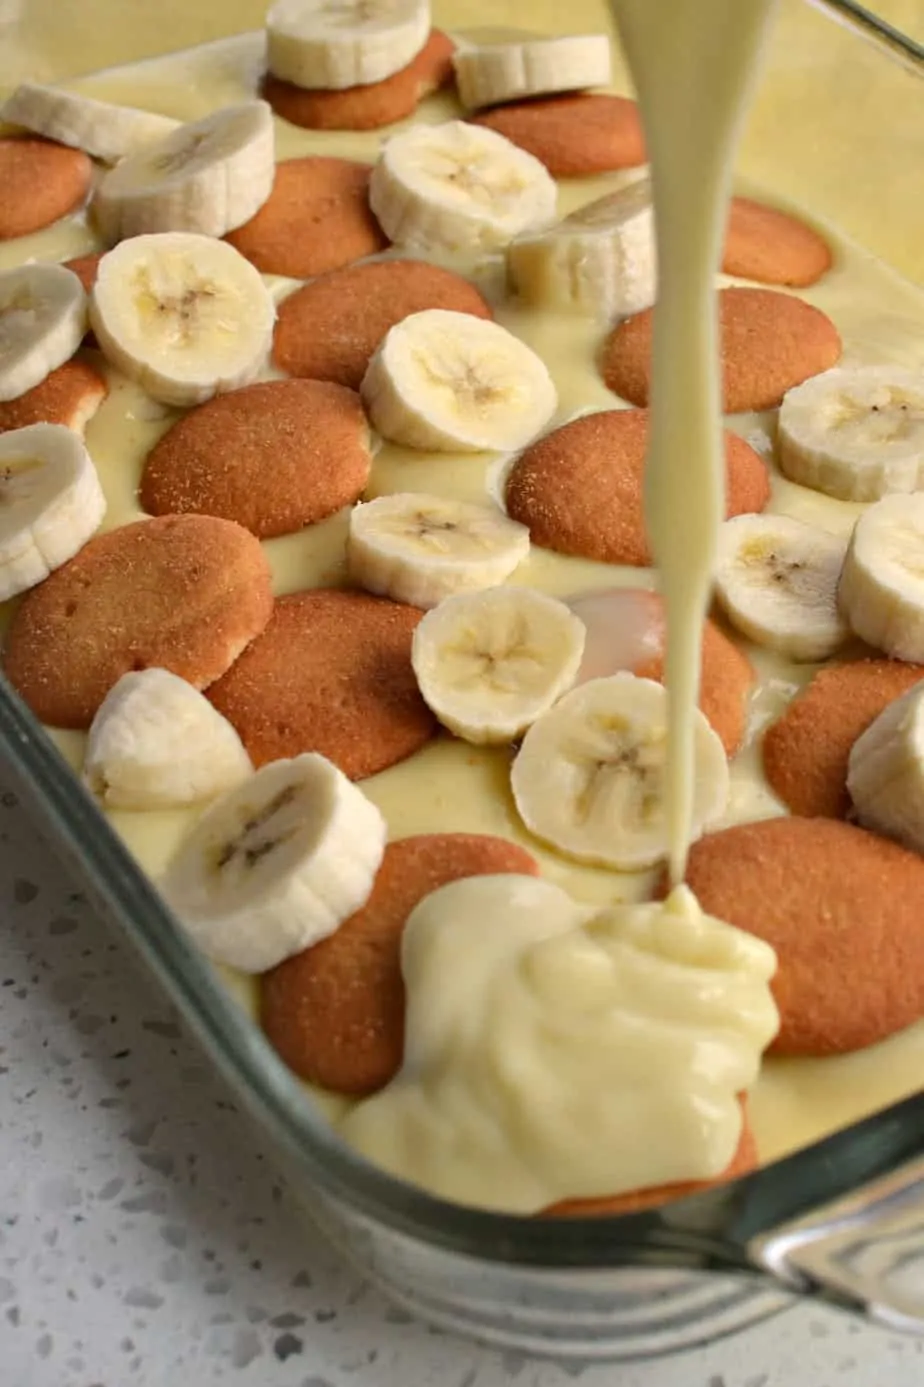 This homemade banana pudding combines sweet vanilla pudding, vanilla wafers, and bananas for a light, sweet dessert